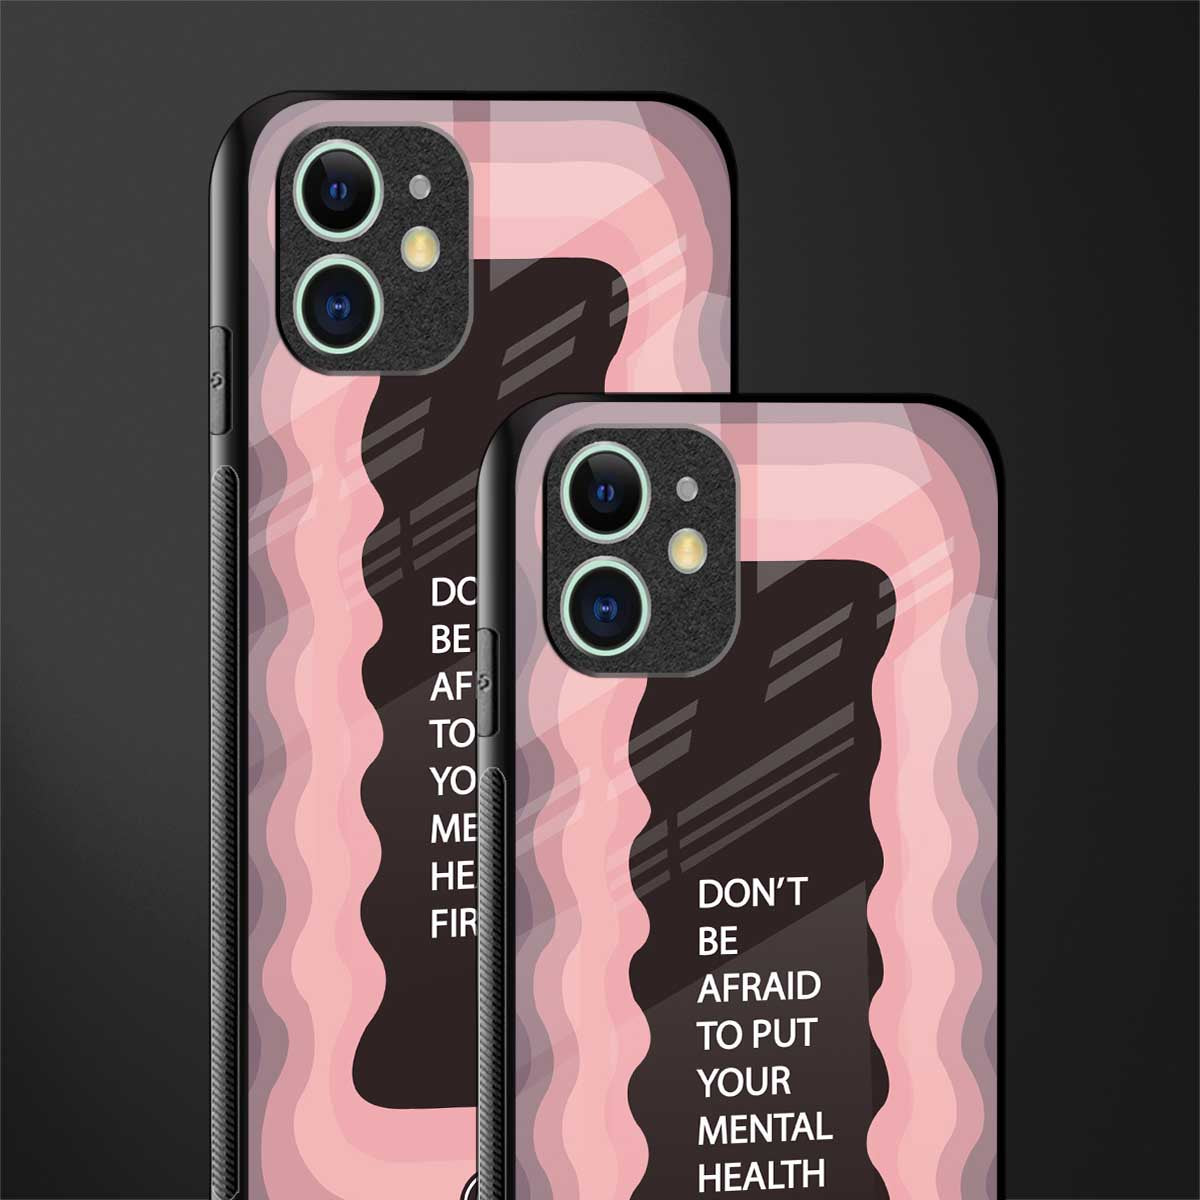 mental health first glass case for iphone 11